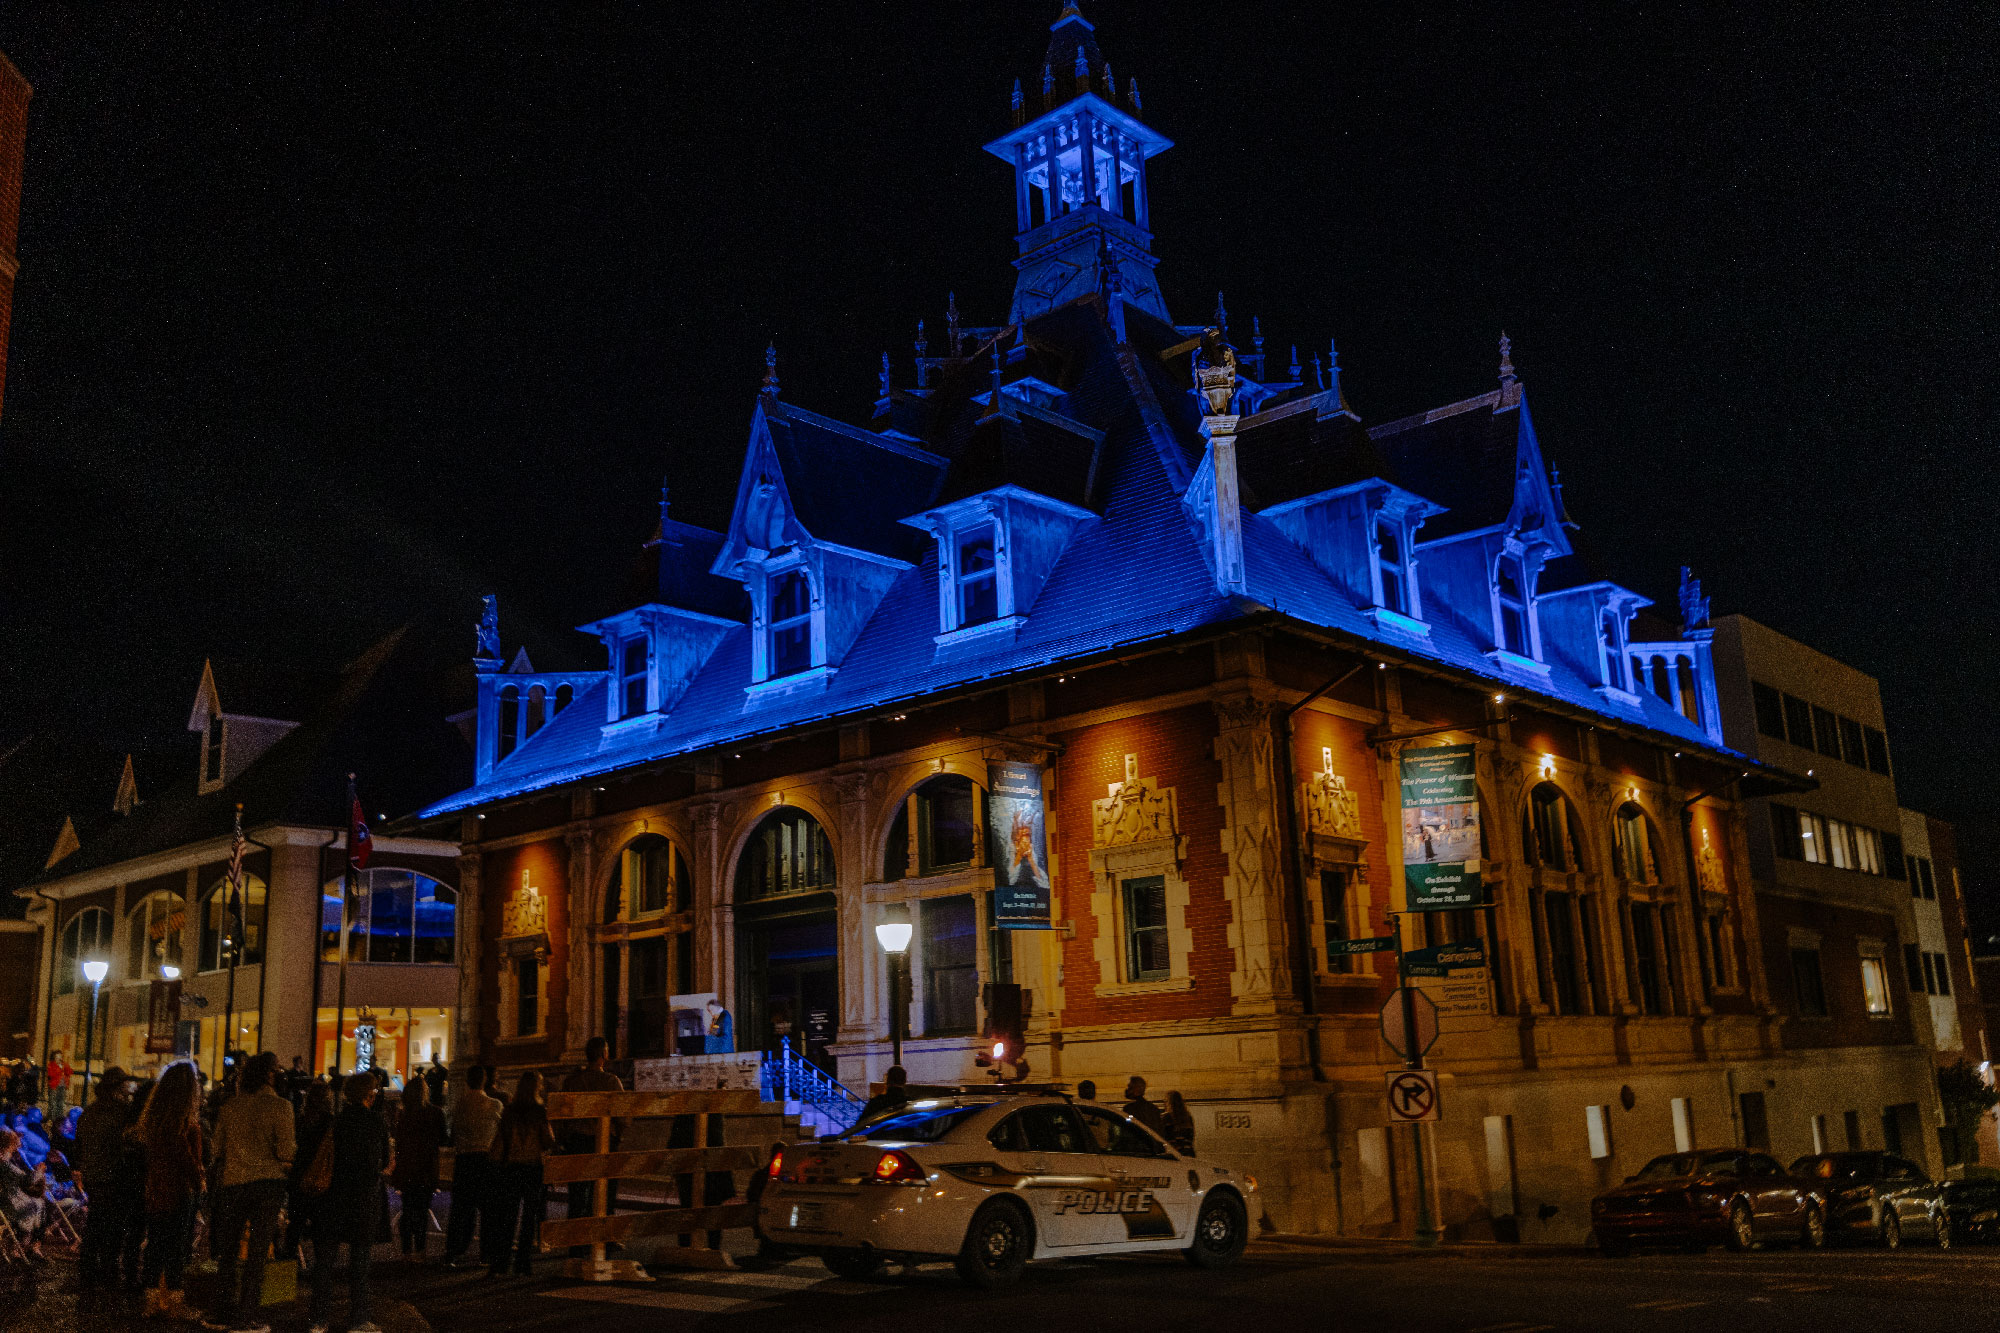 The Customs House Museum & Cultural Center illuminated in blue for the crowd.